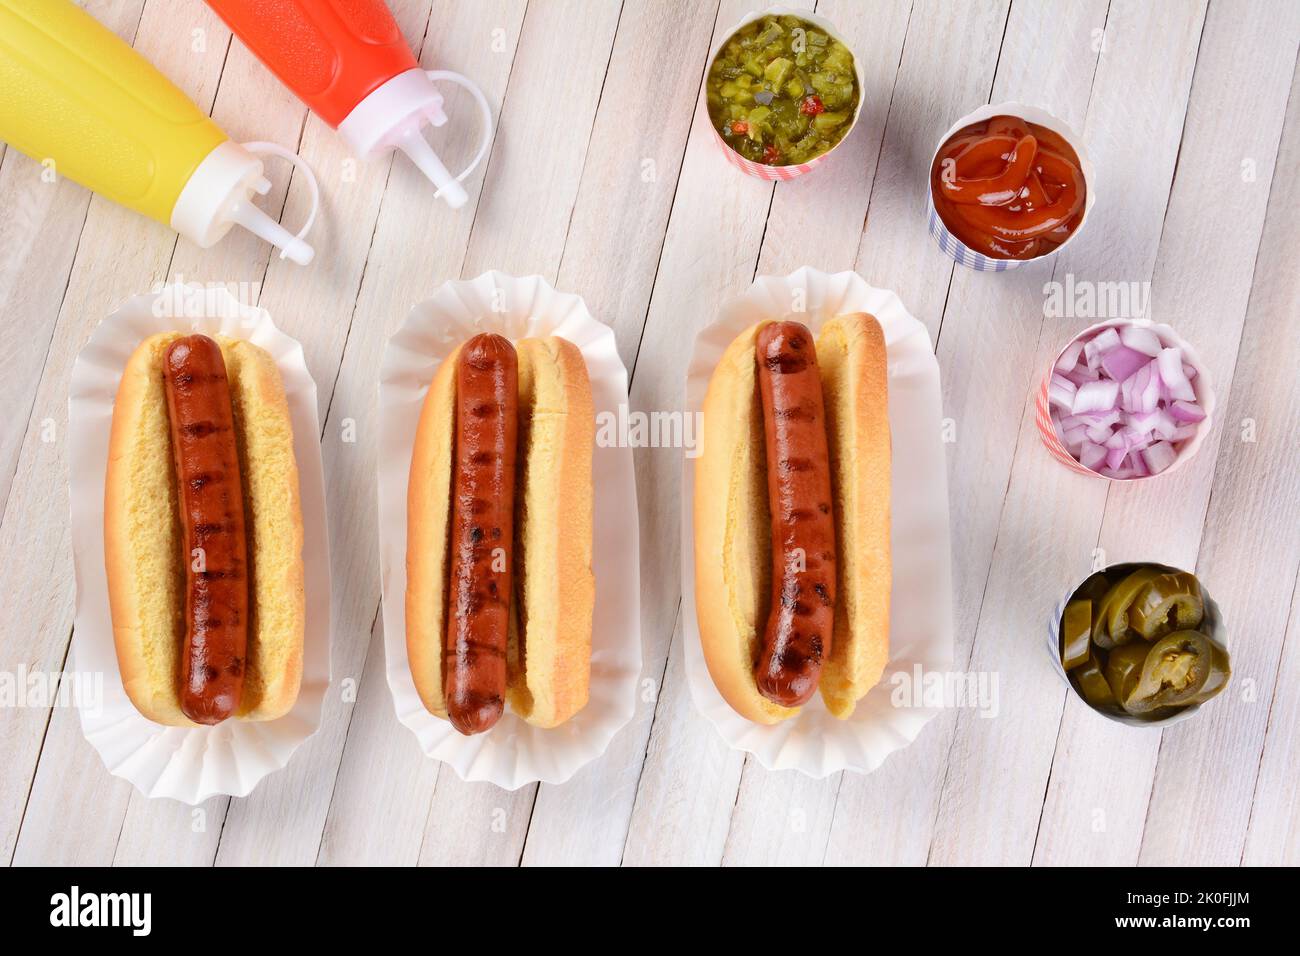 Three grilled hot dogs ready to be garnished on a rustic wood picnic table. High angle view. Stock Photo